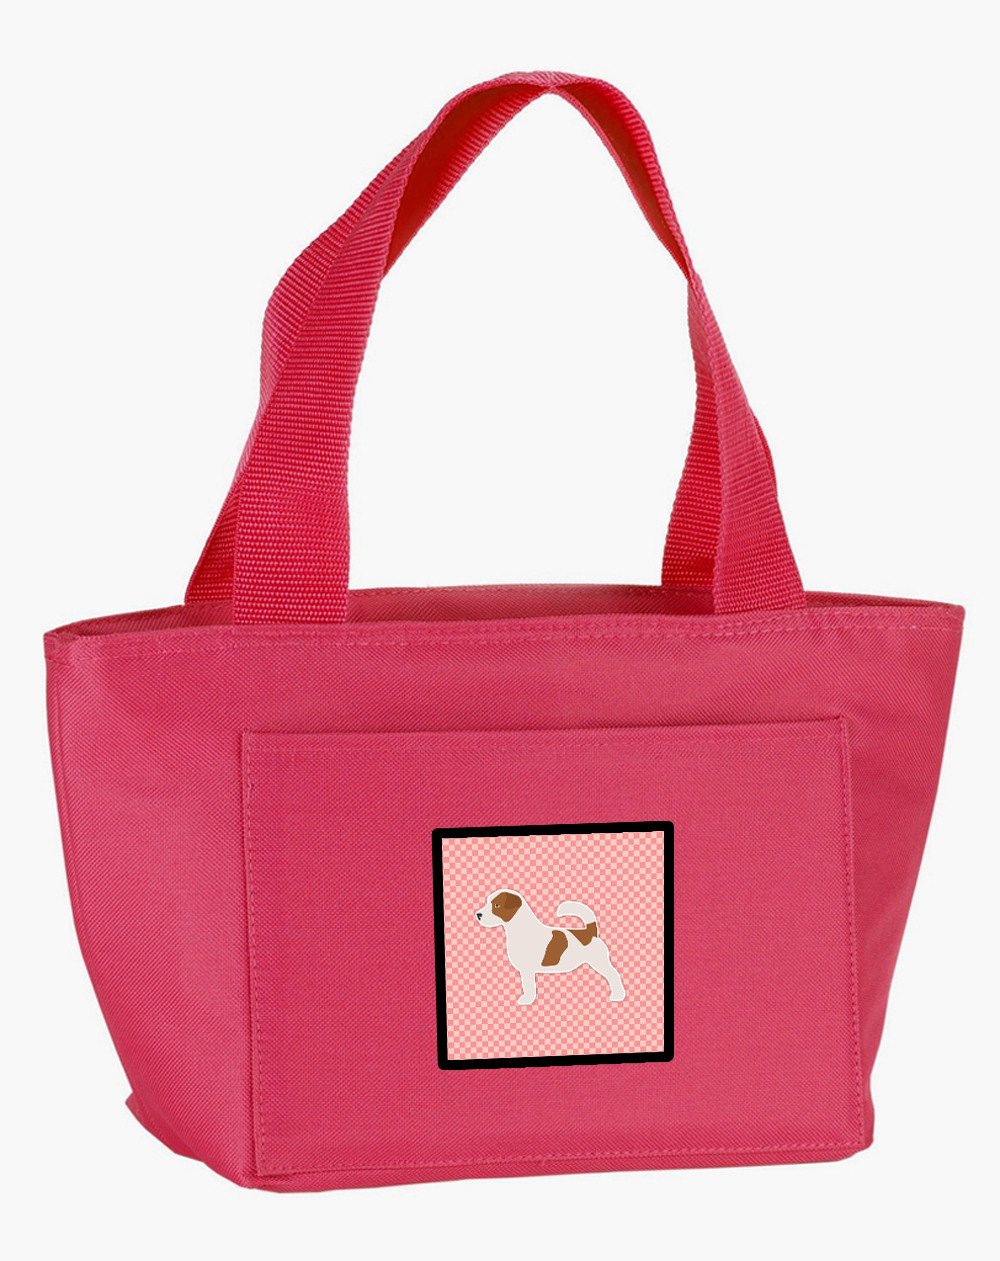 Jack Russell Terrier Checkerboard Pink Lunch Bag BB3607PK-8808 by Caroline's Treasures